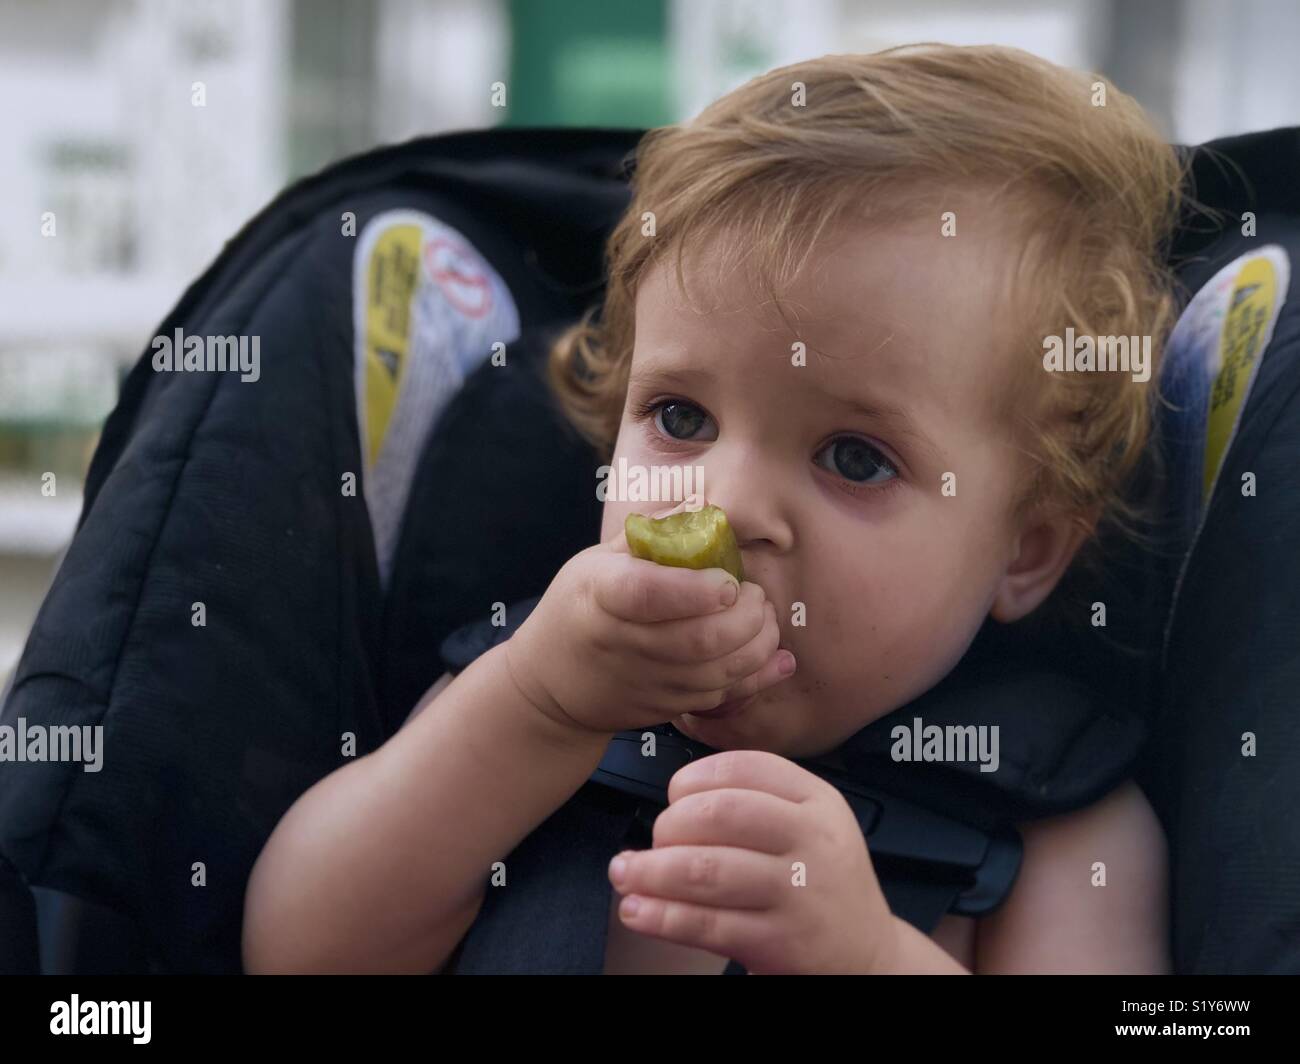 Baby eats a pickle. Stock Photo